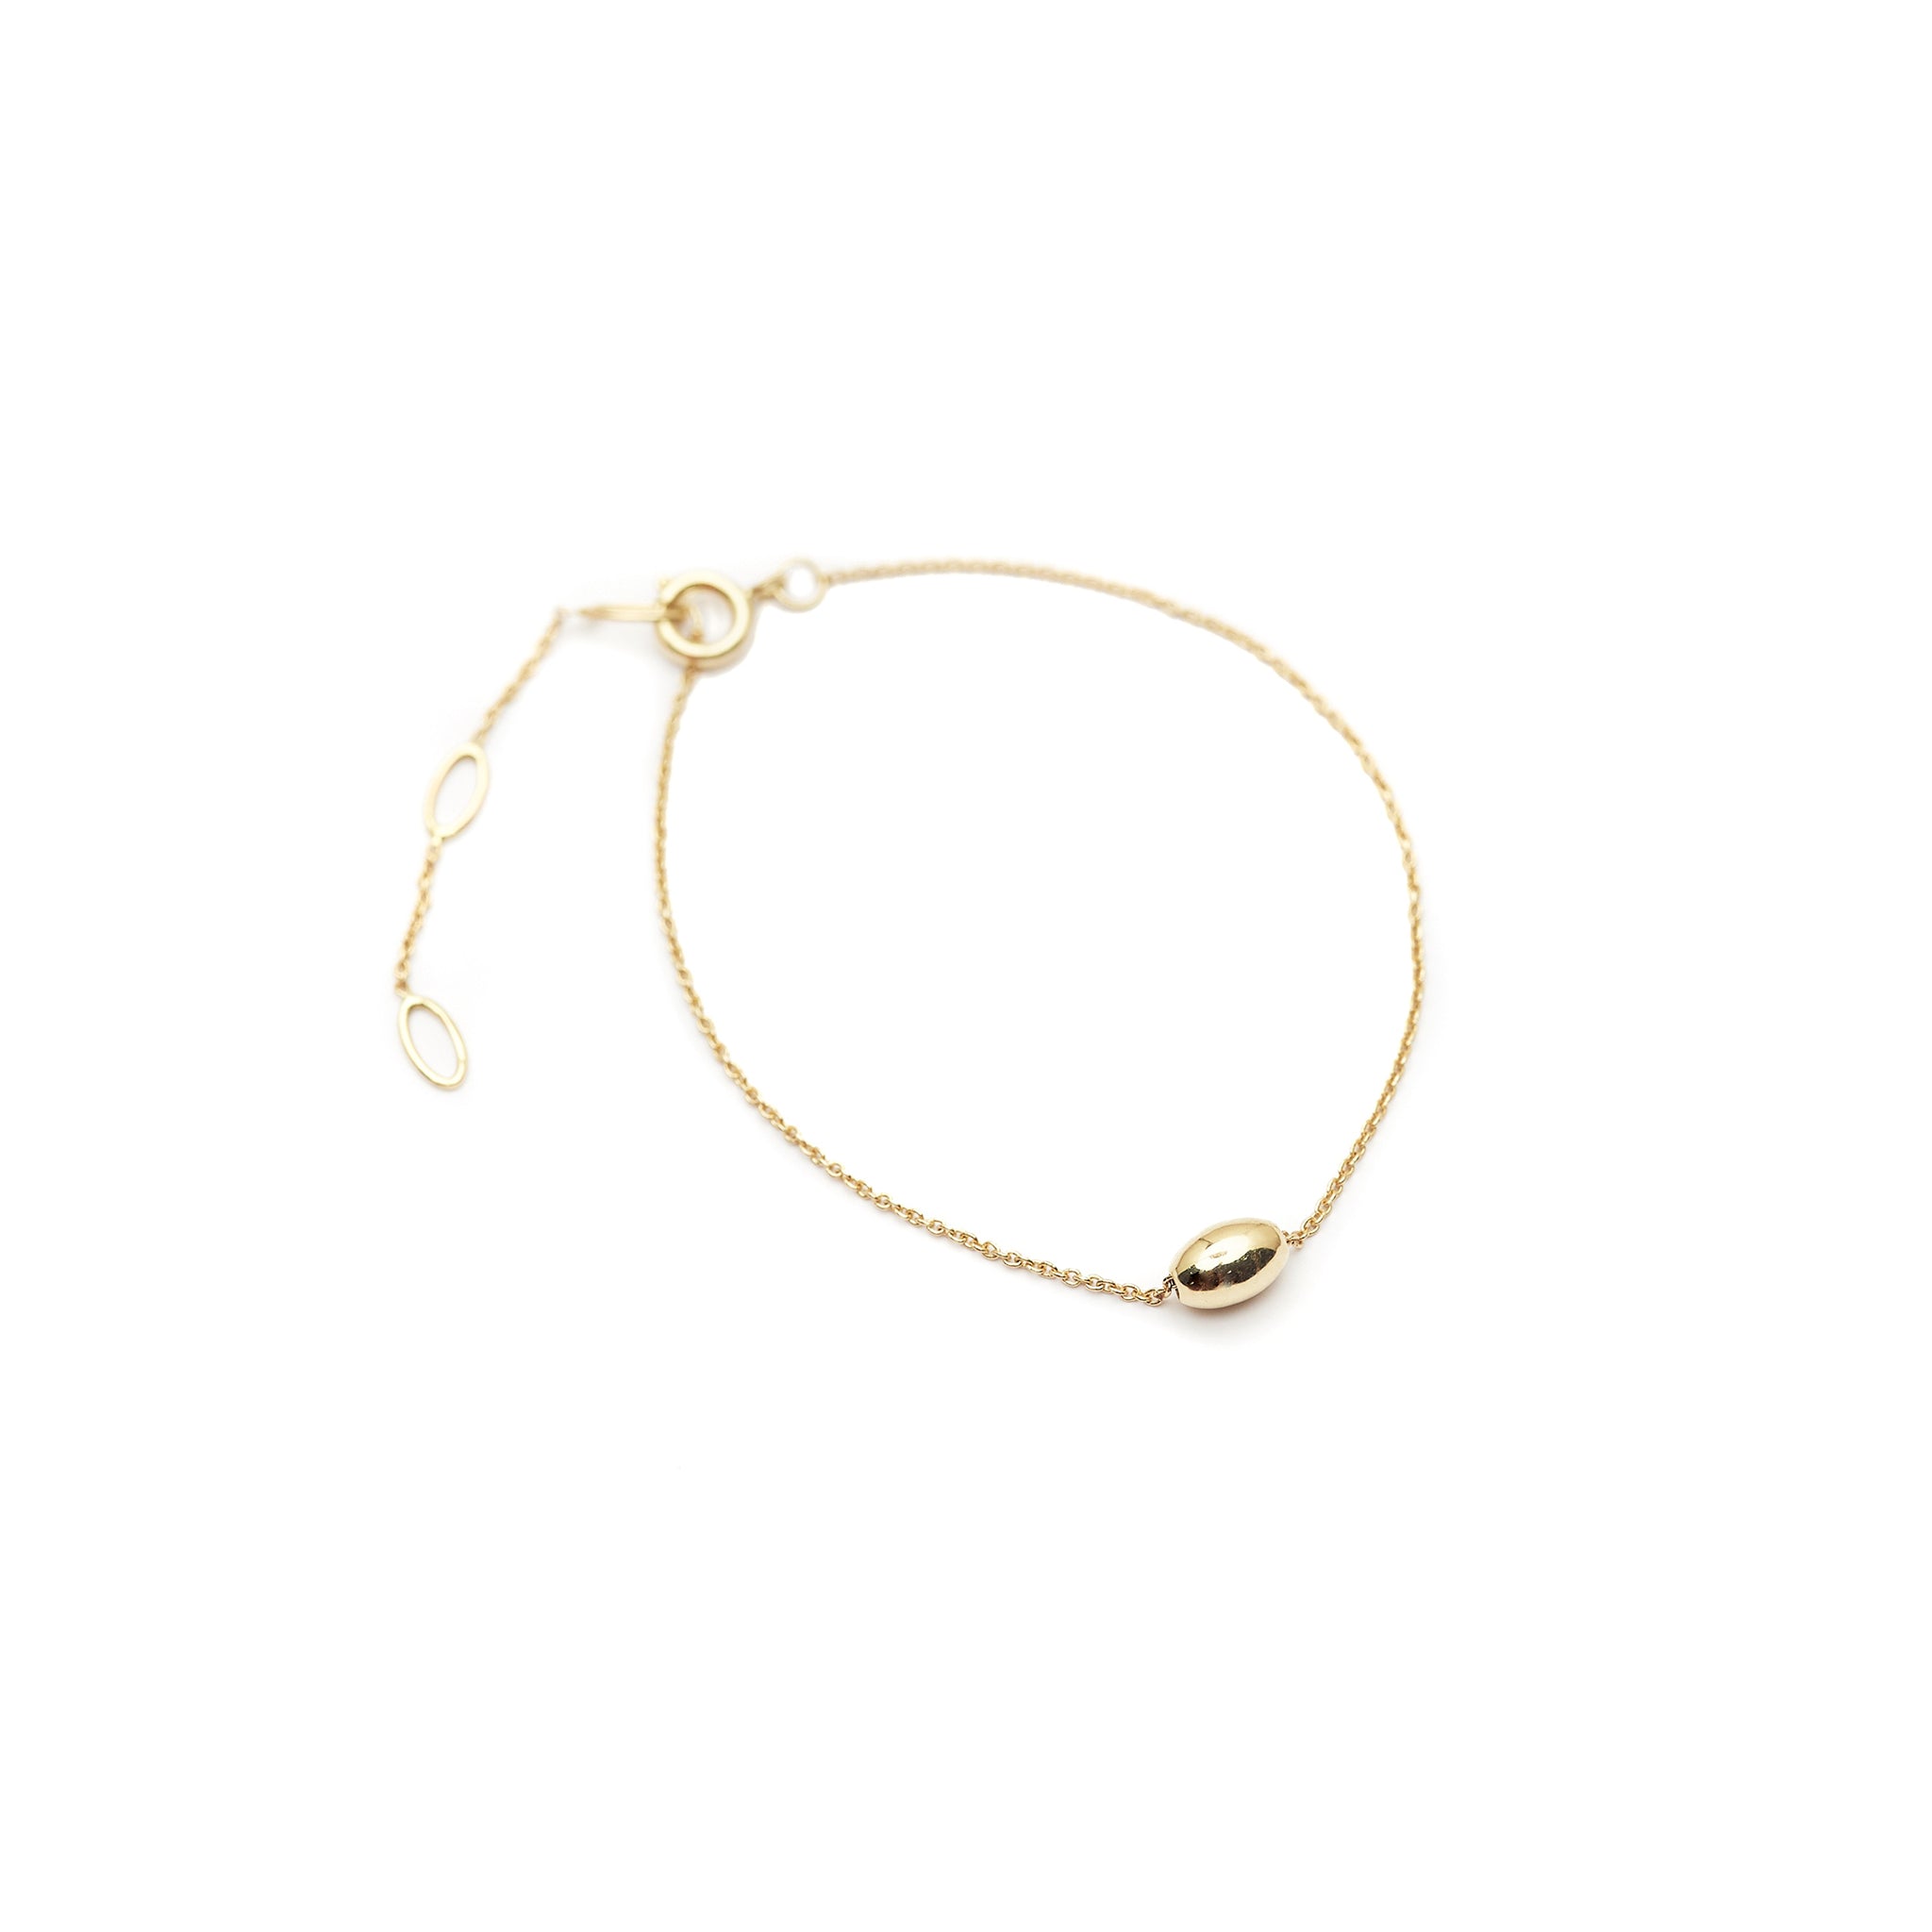 The Straits Finery minimalist bracelet in 14k solid gold with gold bead